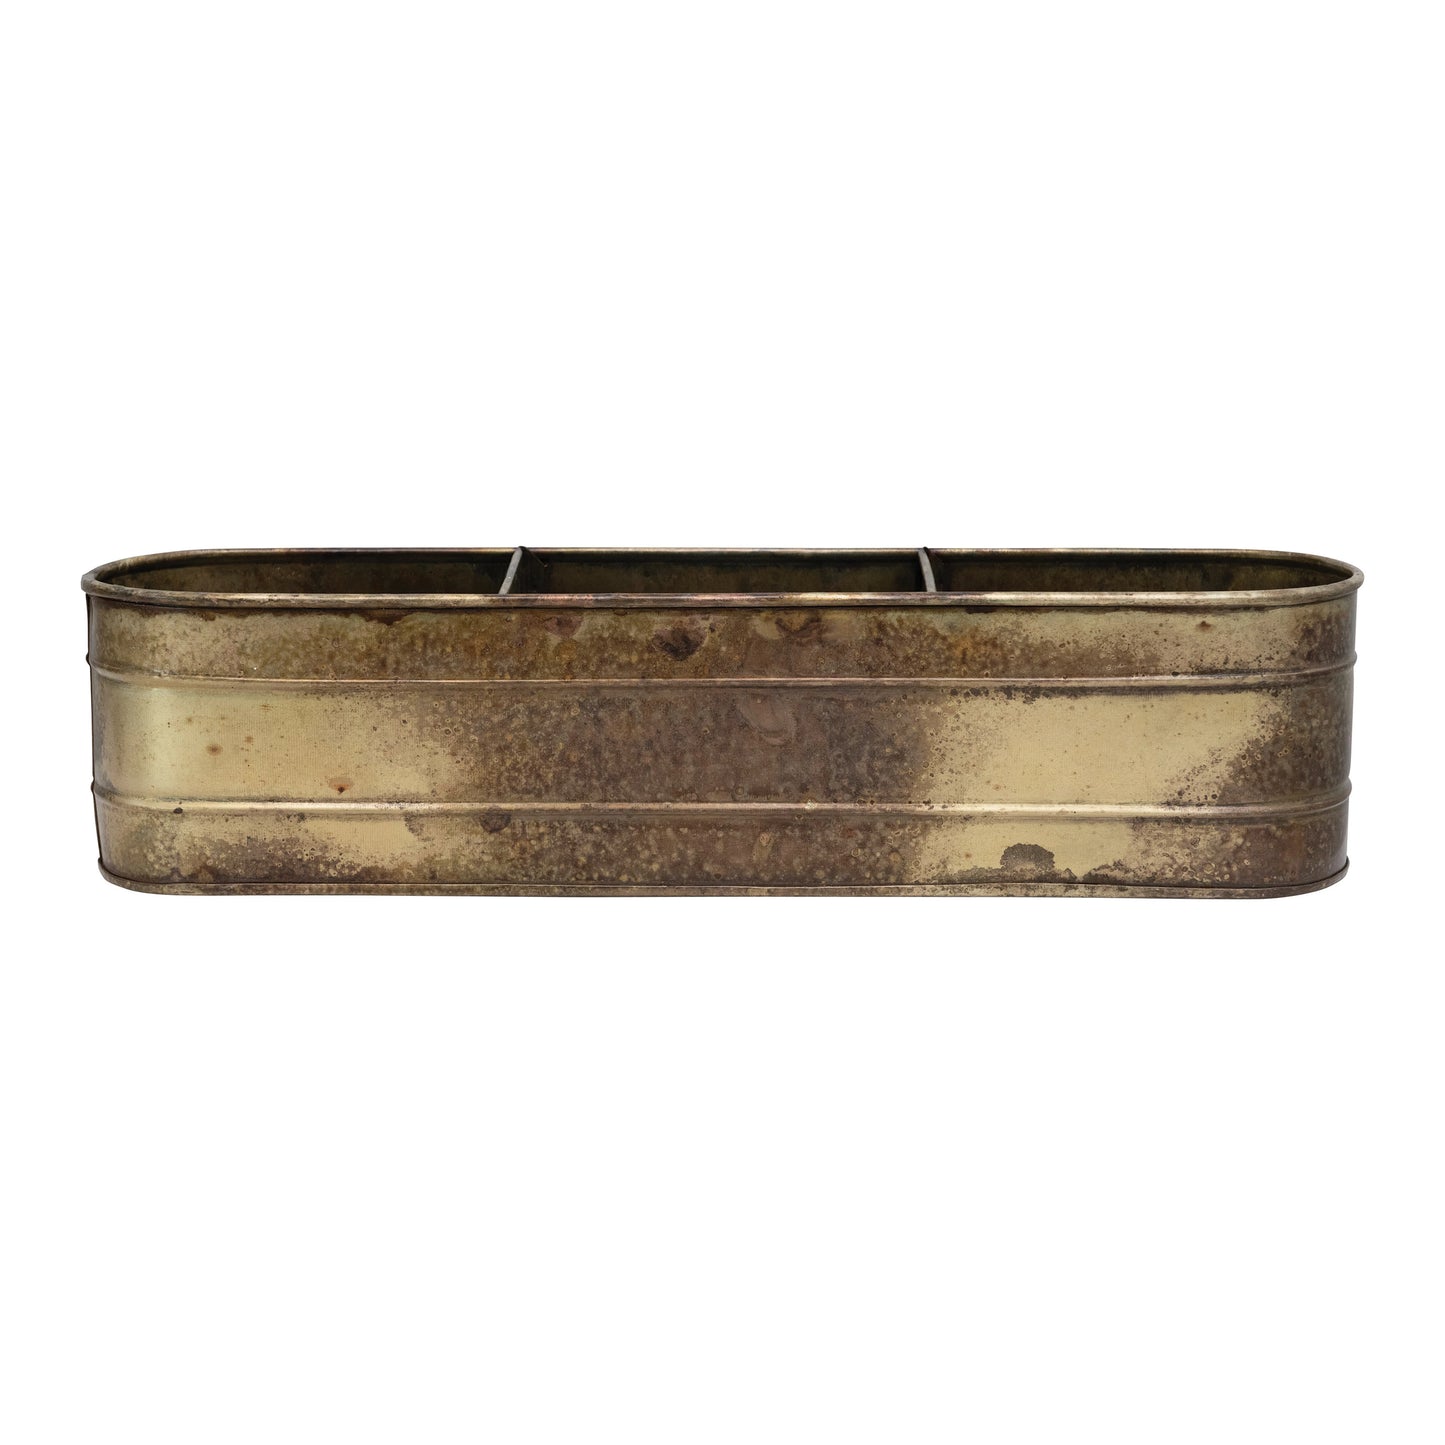 Galvanized metal window planter with 3 sections, Antique Brass Finish